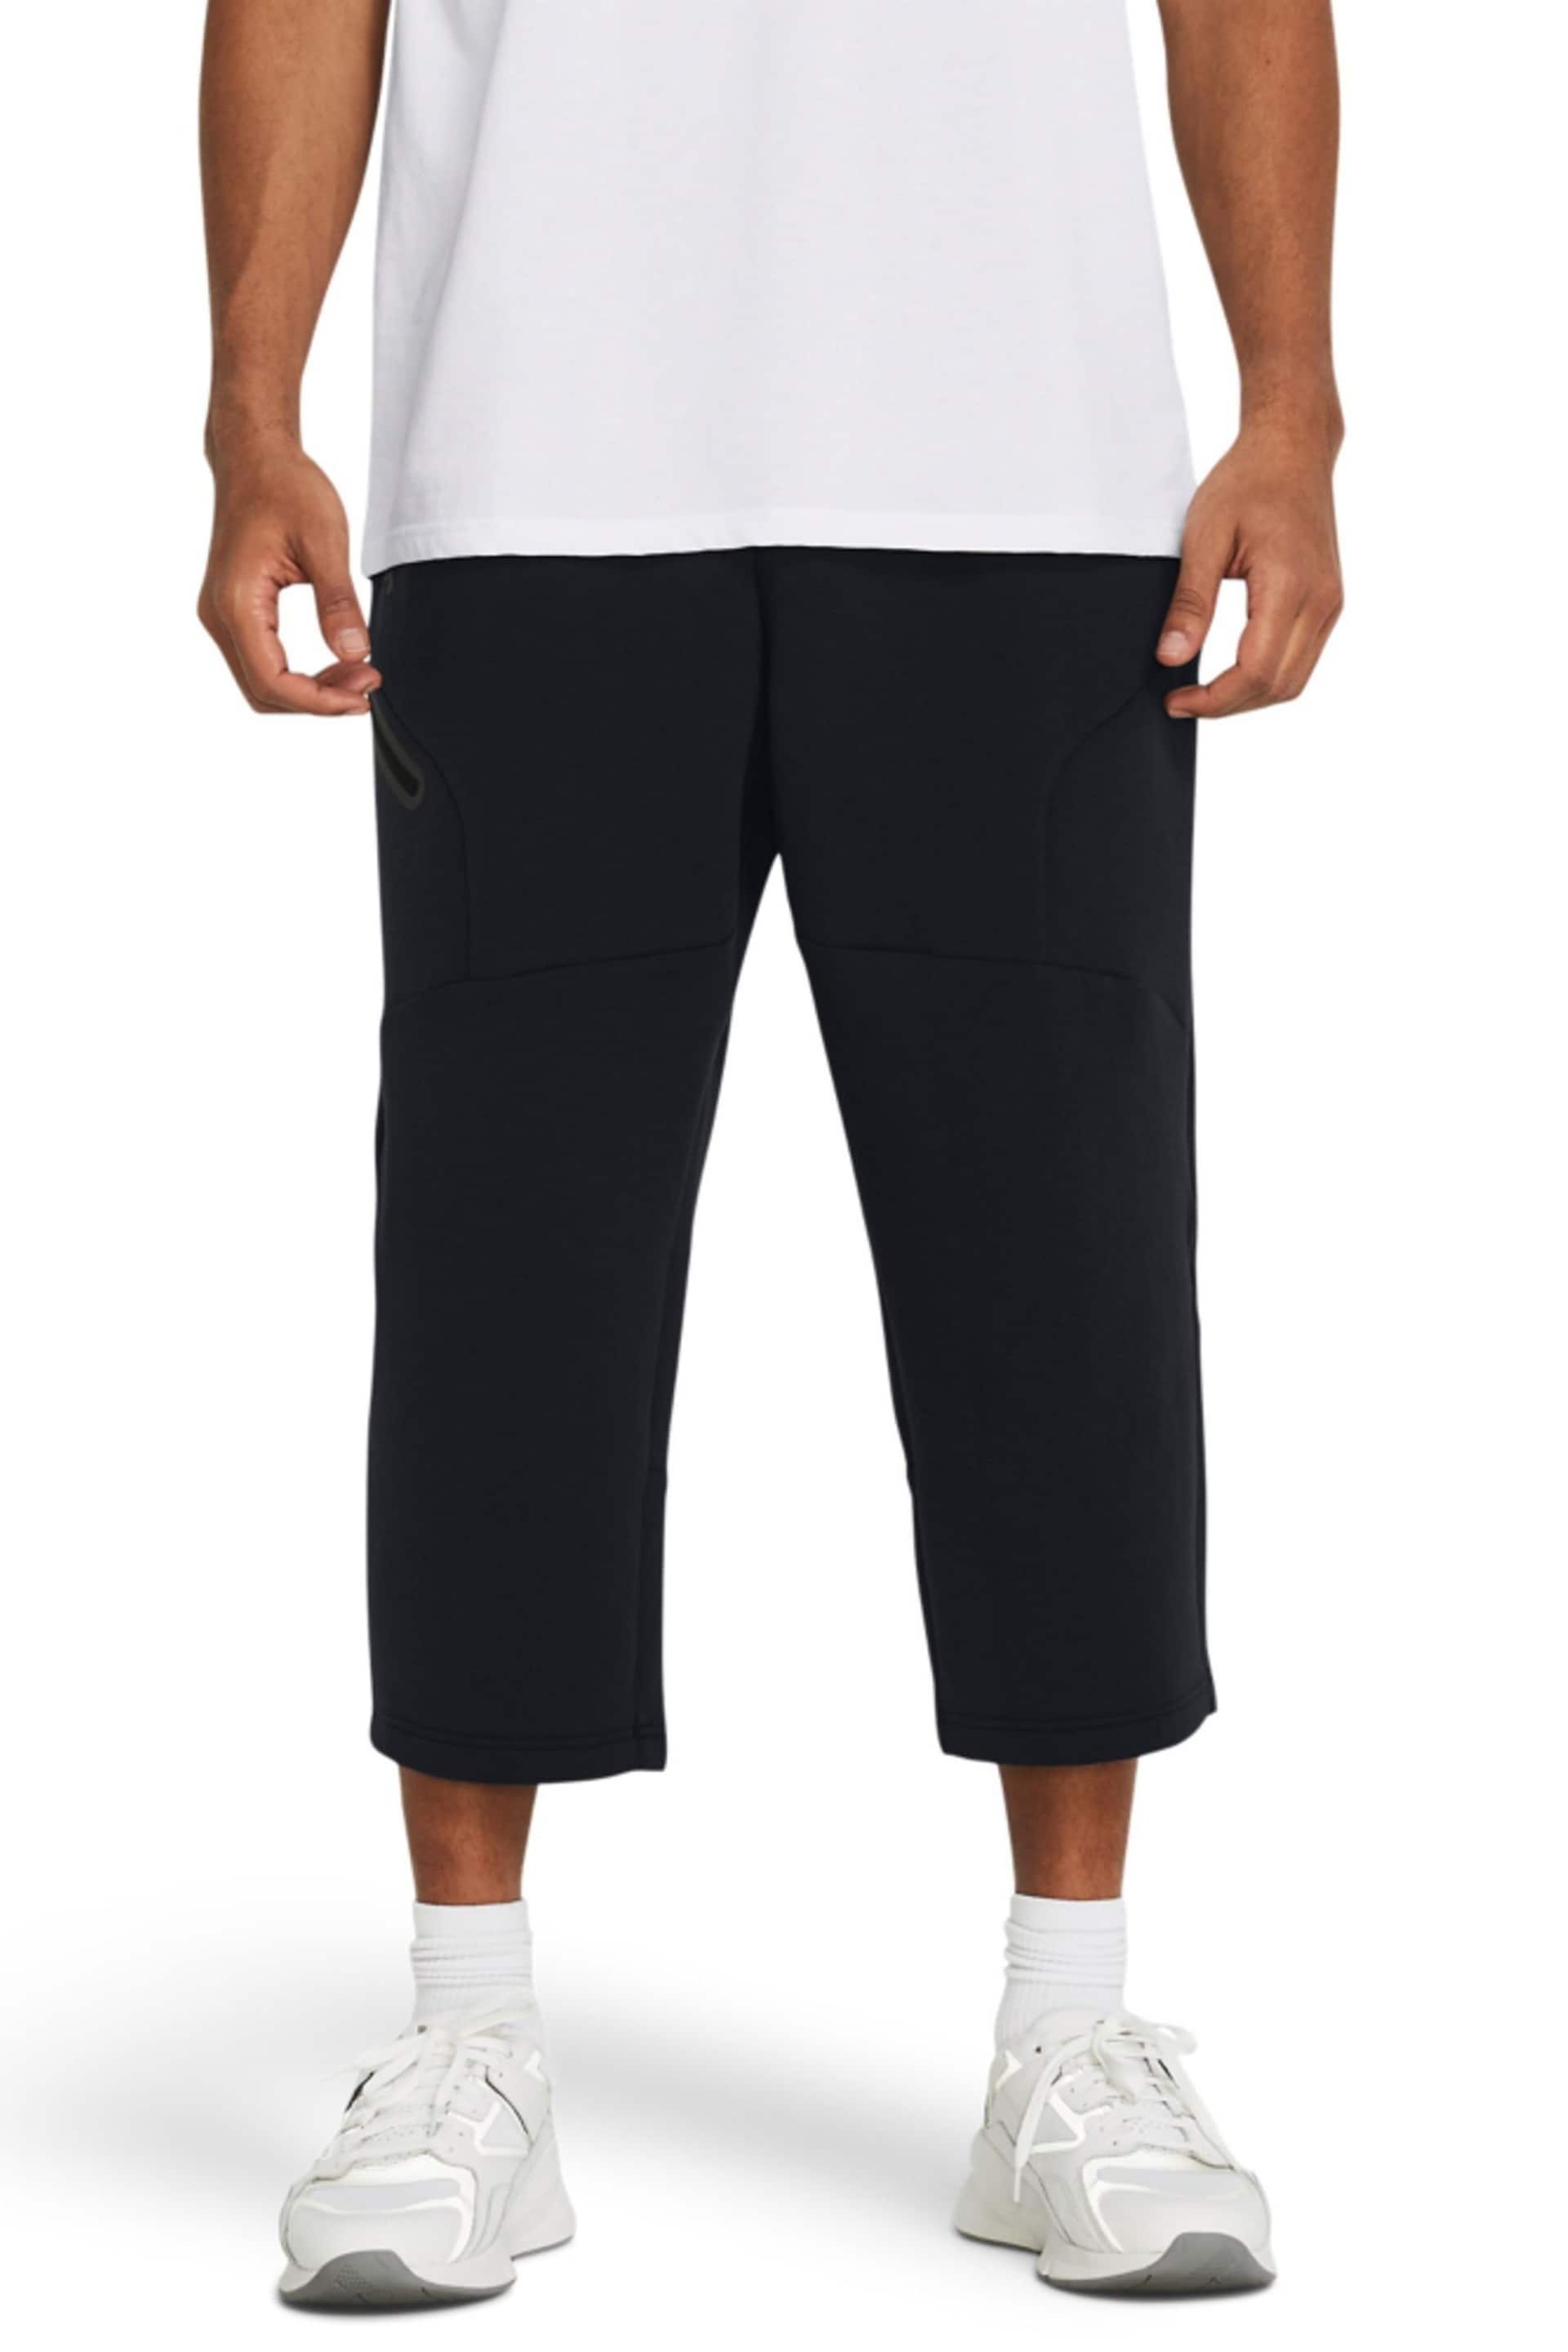 Under Armour Unstoppable Fleece Crop Black Trousers - Image 1 of 4